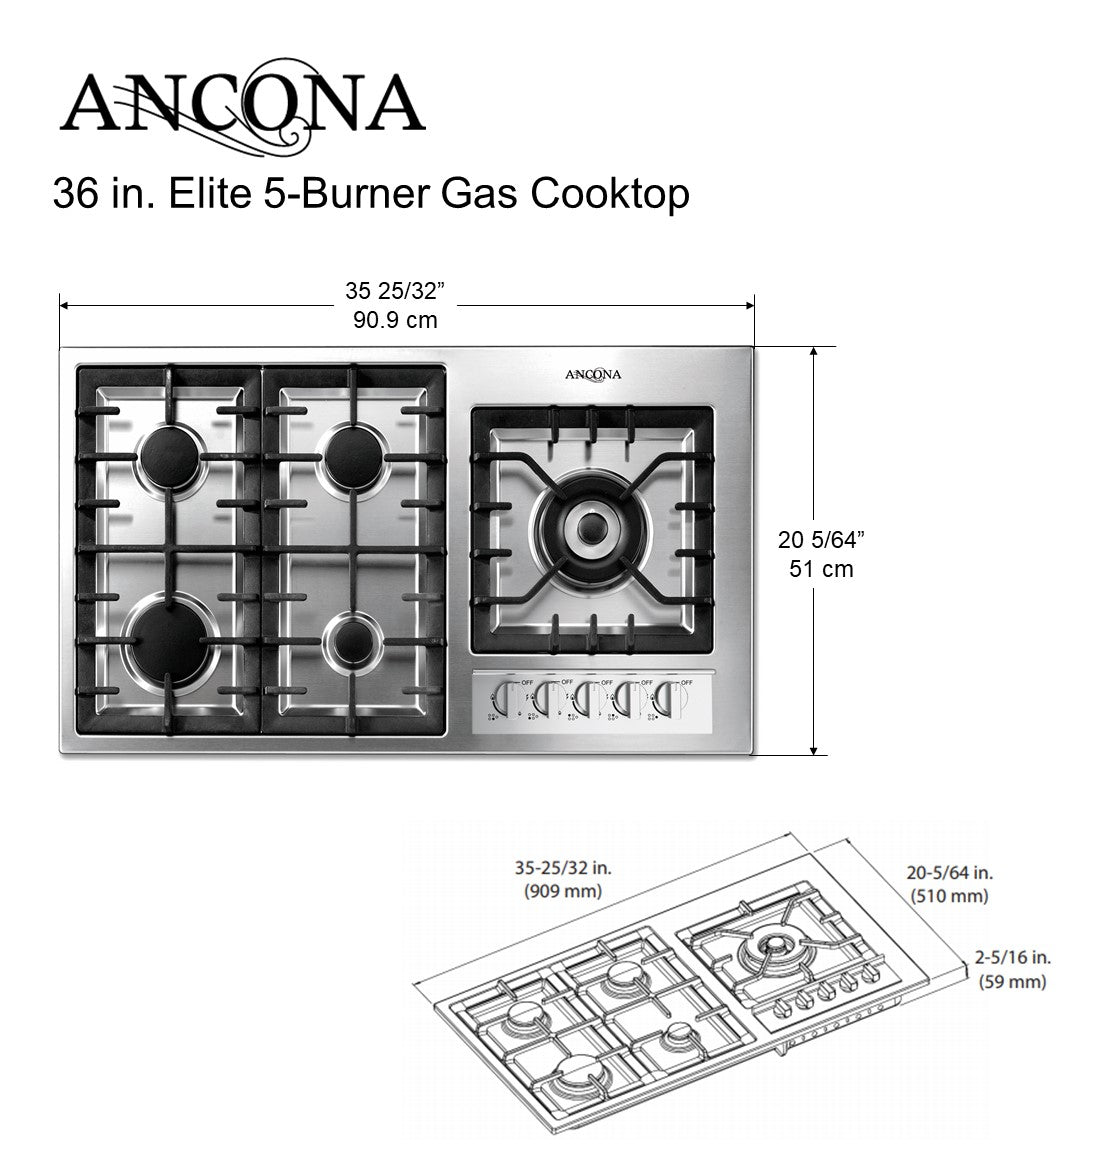 Elite 36-Inch 5-Burner Gas Cooktop with Wok Pan Support